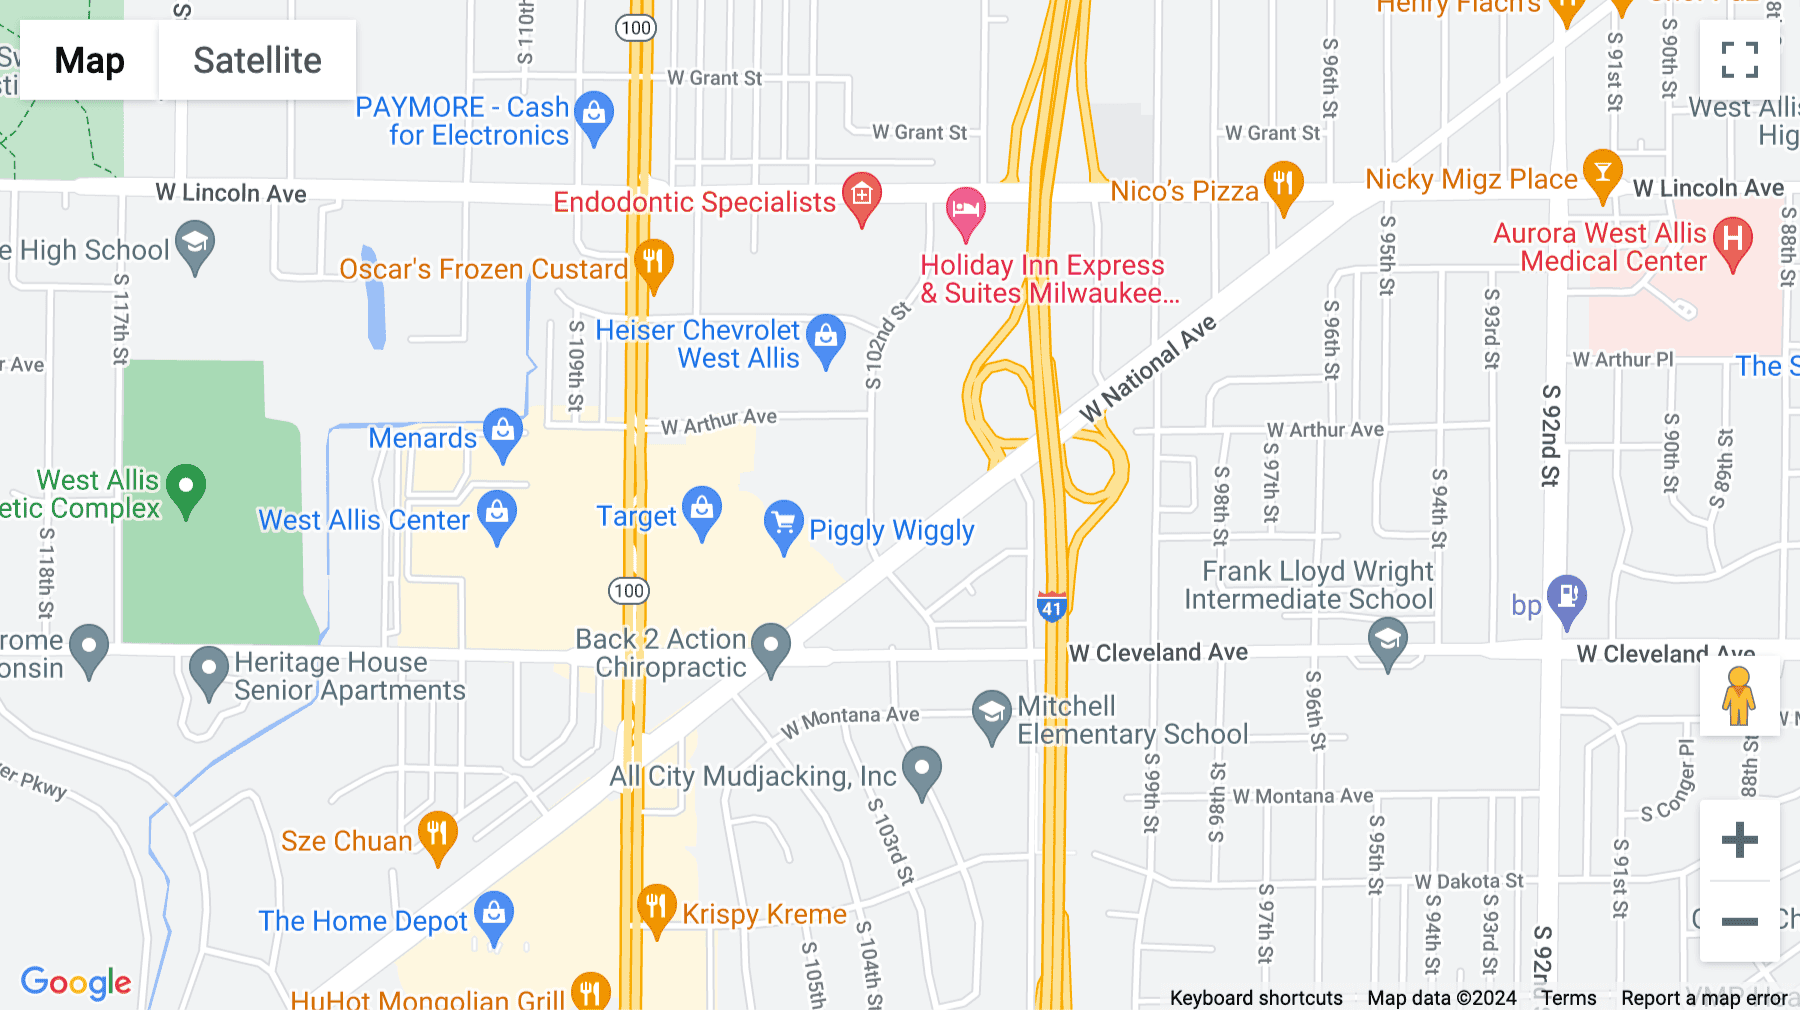 Click for interative map of Lincoln Center 3, 10150 West National Avenue, Milwaukee